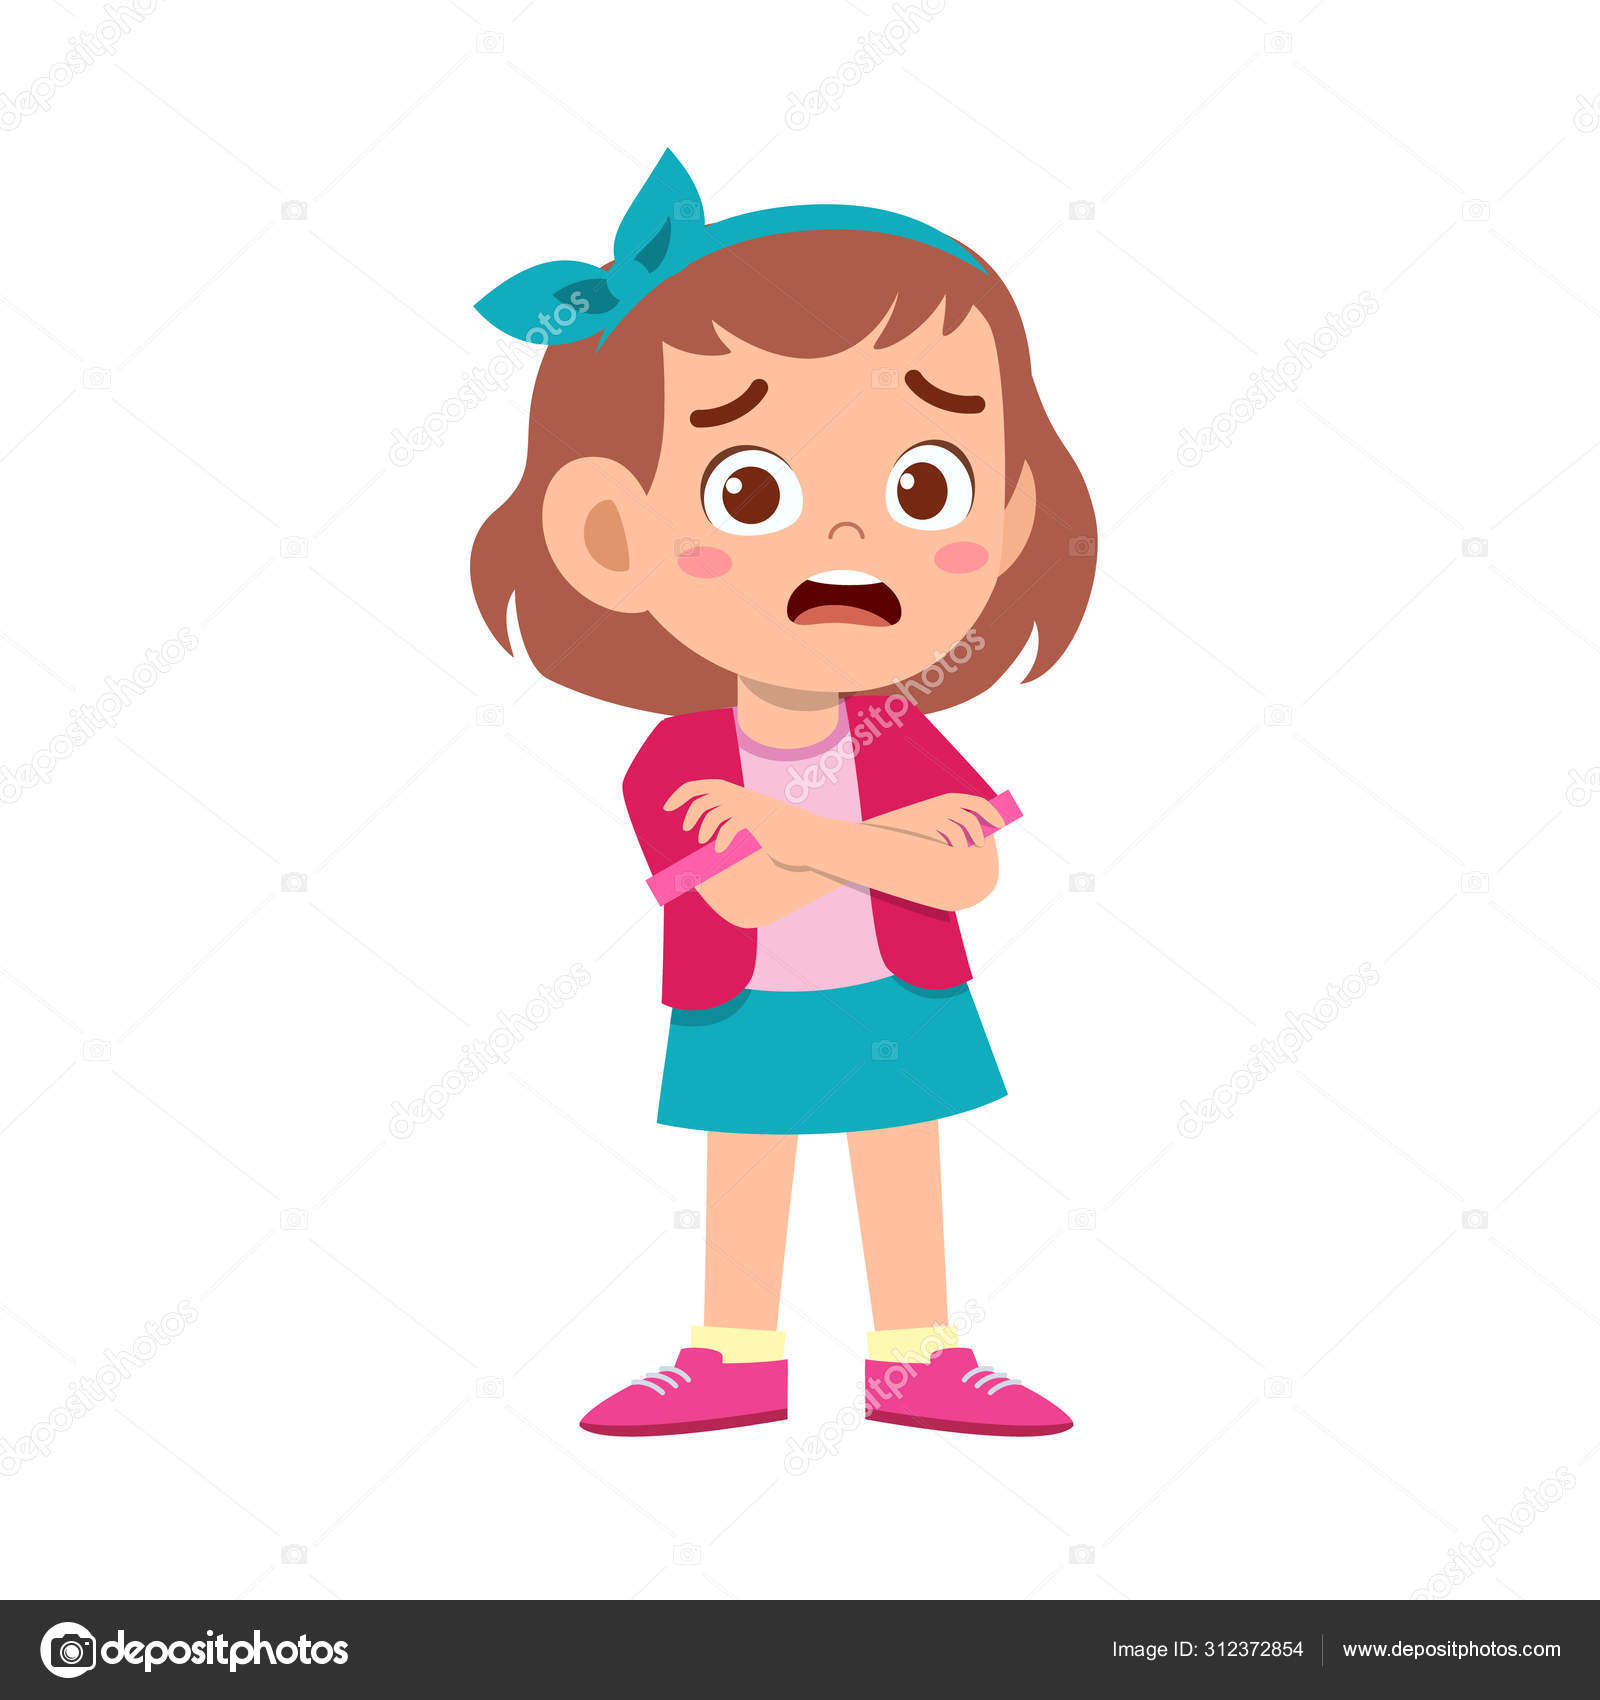 Little girl scared face expression cartoon Vector Image